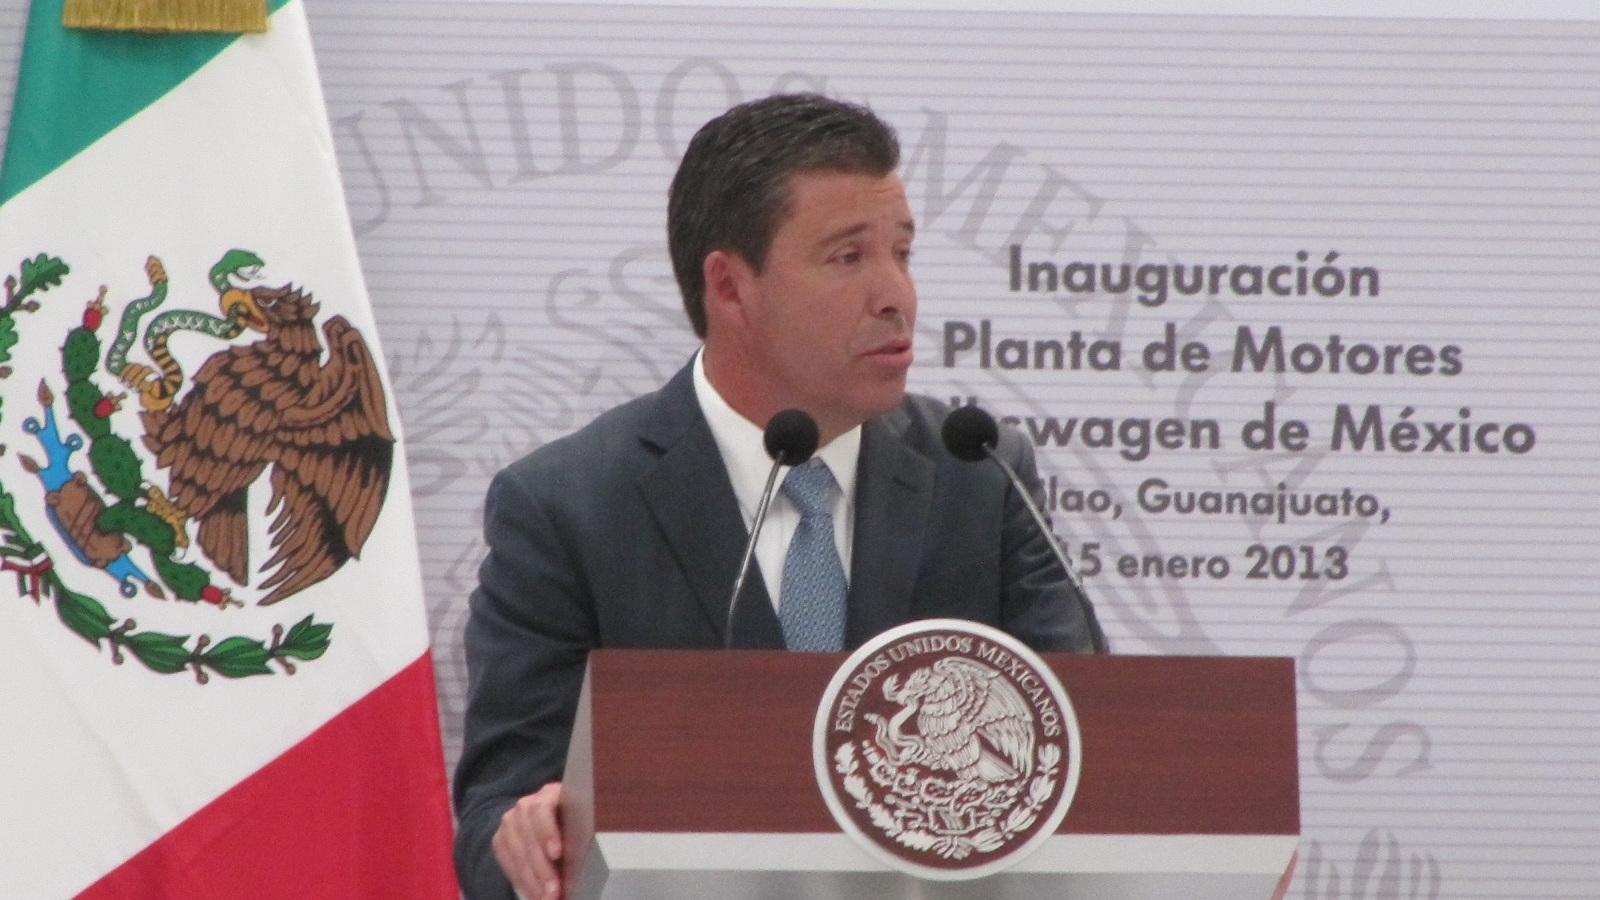 Miguel Marquez, governor of Guanajuato, speaks at opening of Volkswagen engine plant, Silao, Mexico